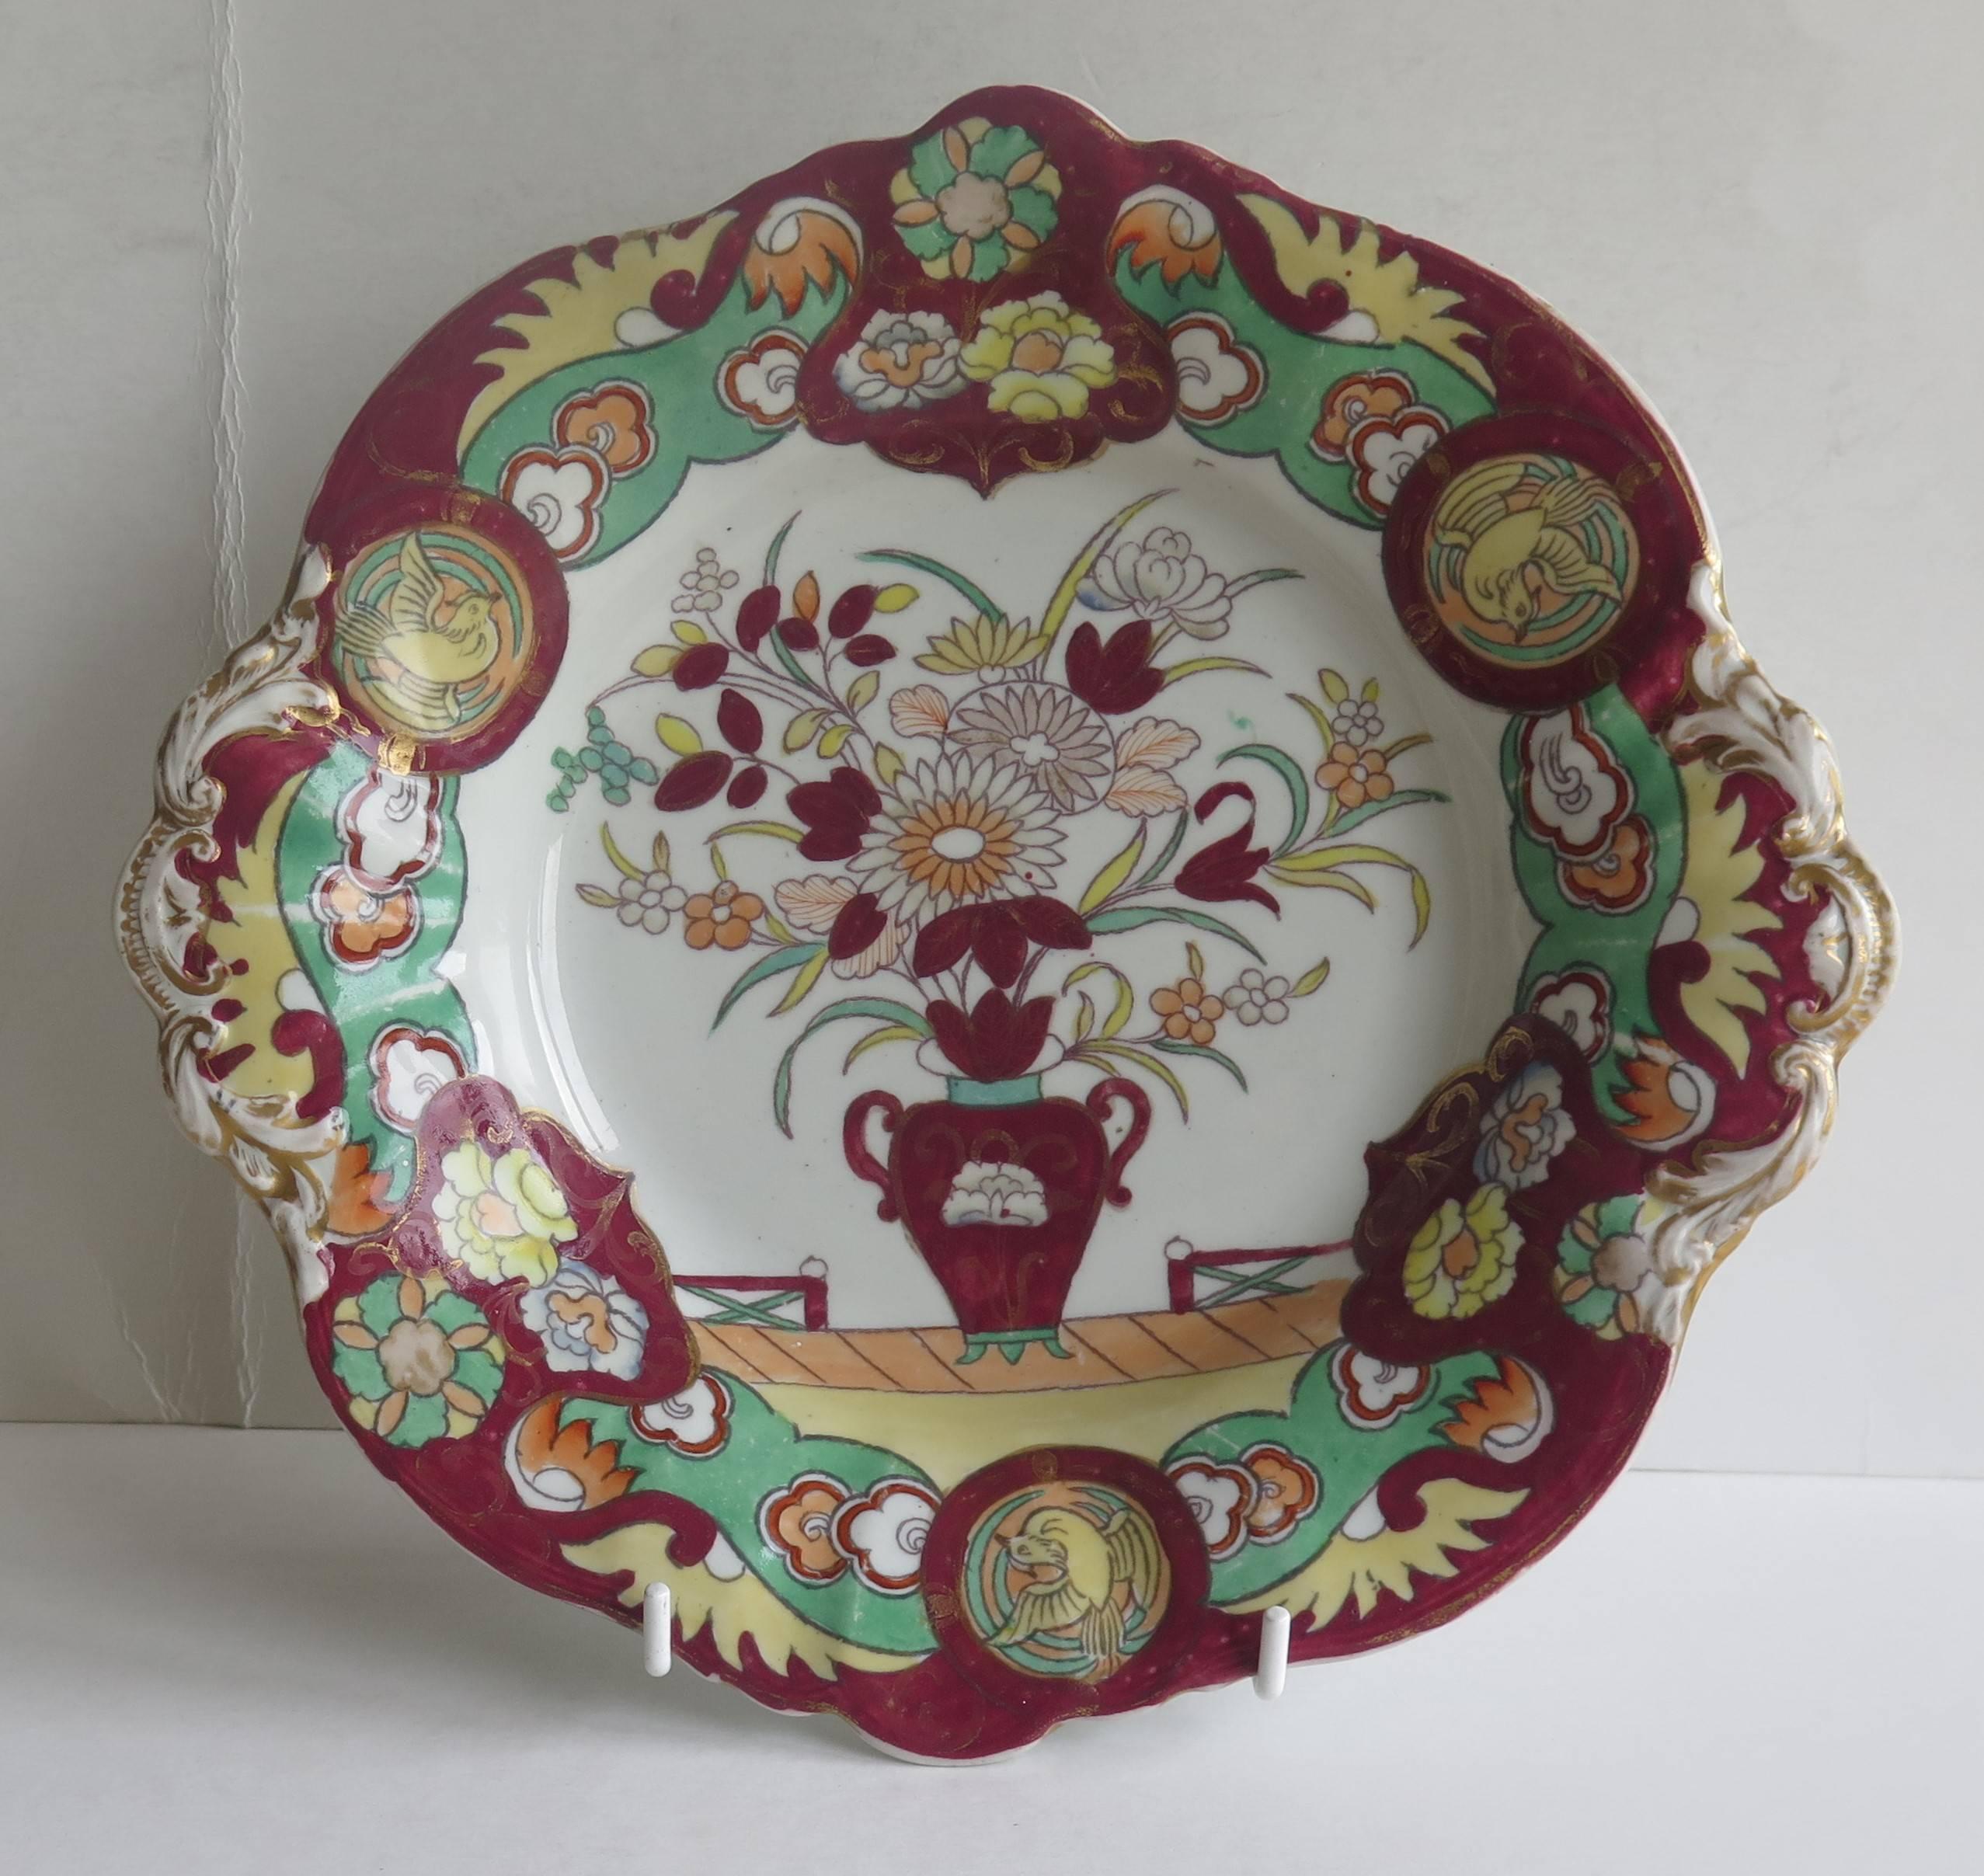 This is a very attractive two handled shallow Desert Bowl or Dish made by Mason's Ironstone Pottery, in the early 19th century.

The bowl is decorated in the Fence Vase and Dove chinoiserie influenced pattern, which shows a central flower filled